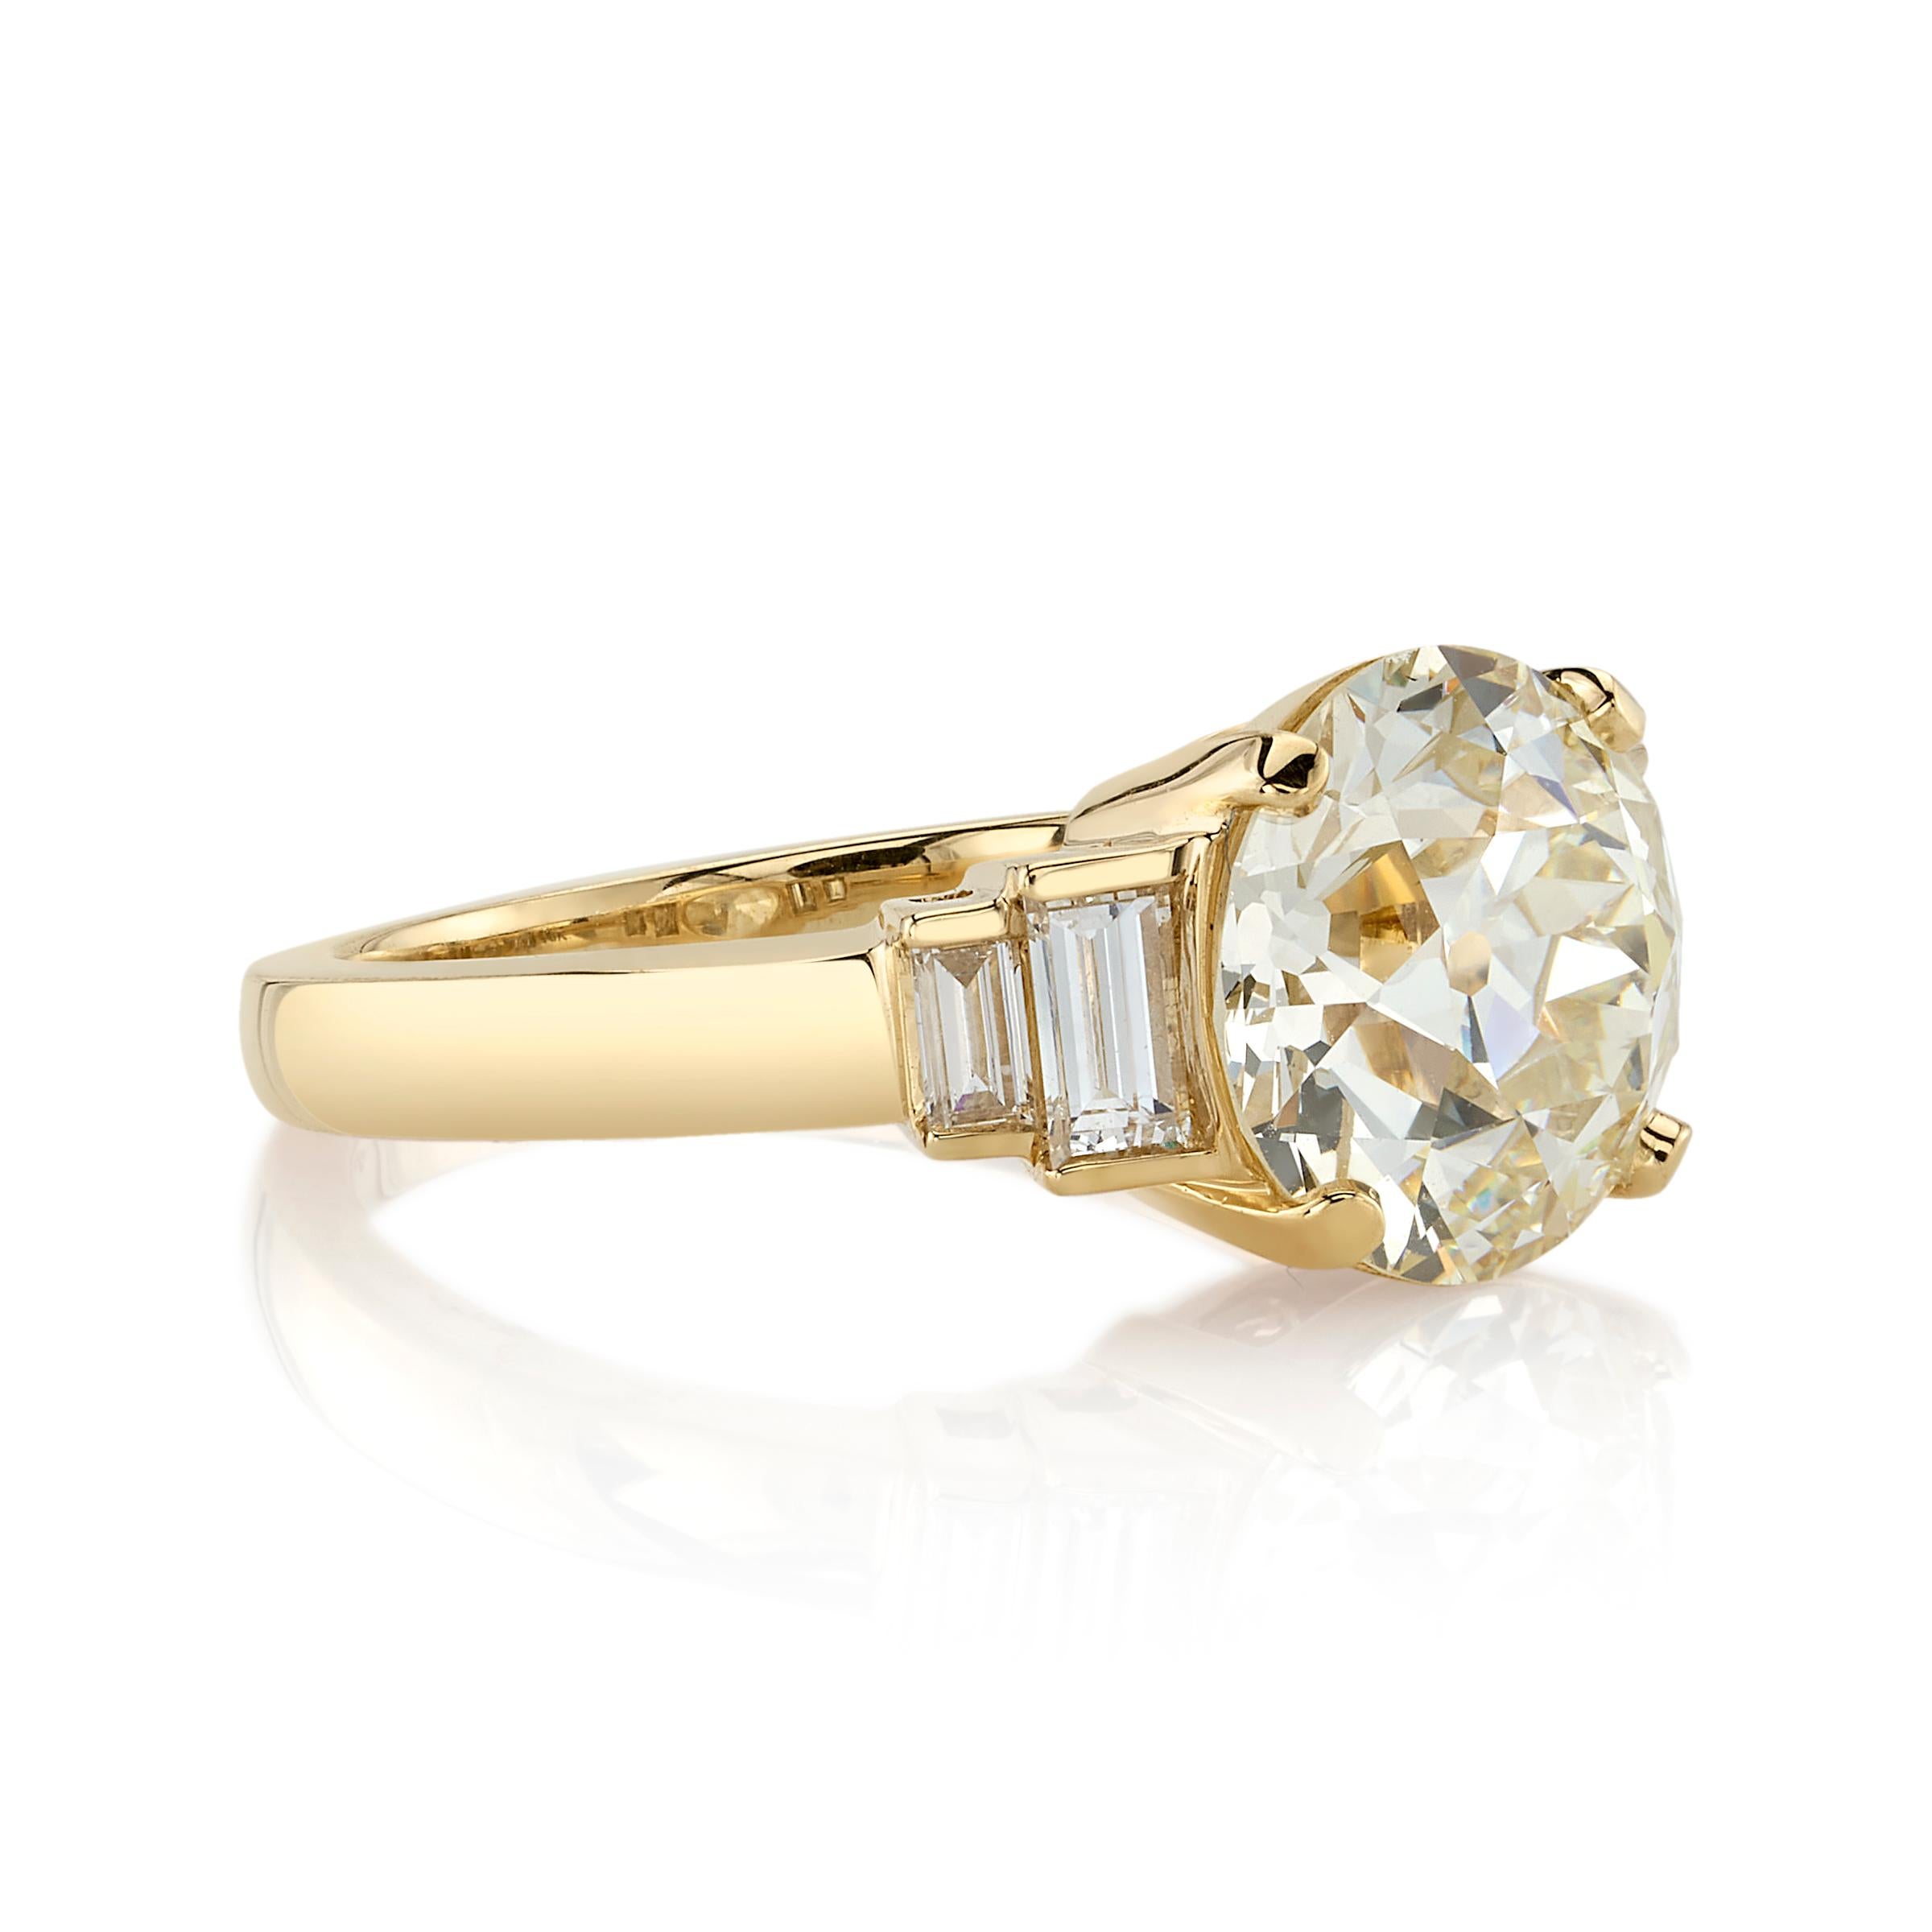 3.47ct L/VS1 GIA certified old European cut diamond with 0.44ctw baguette cut diamond accents set in a handcrafted 18K yellow gold mounting.

\